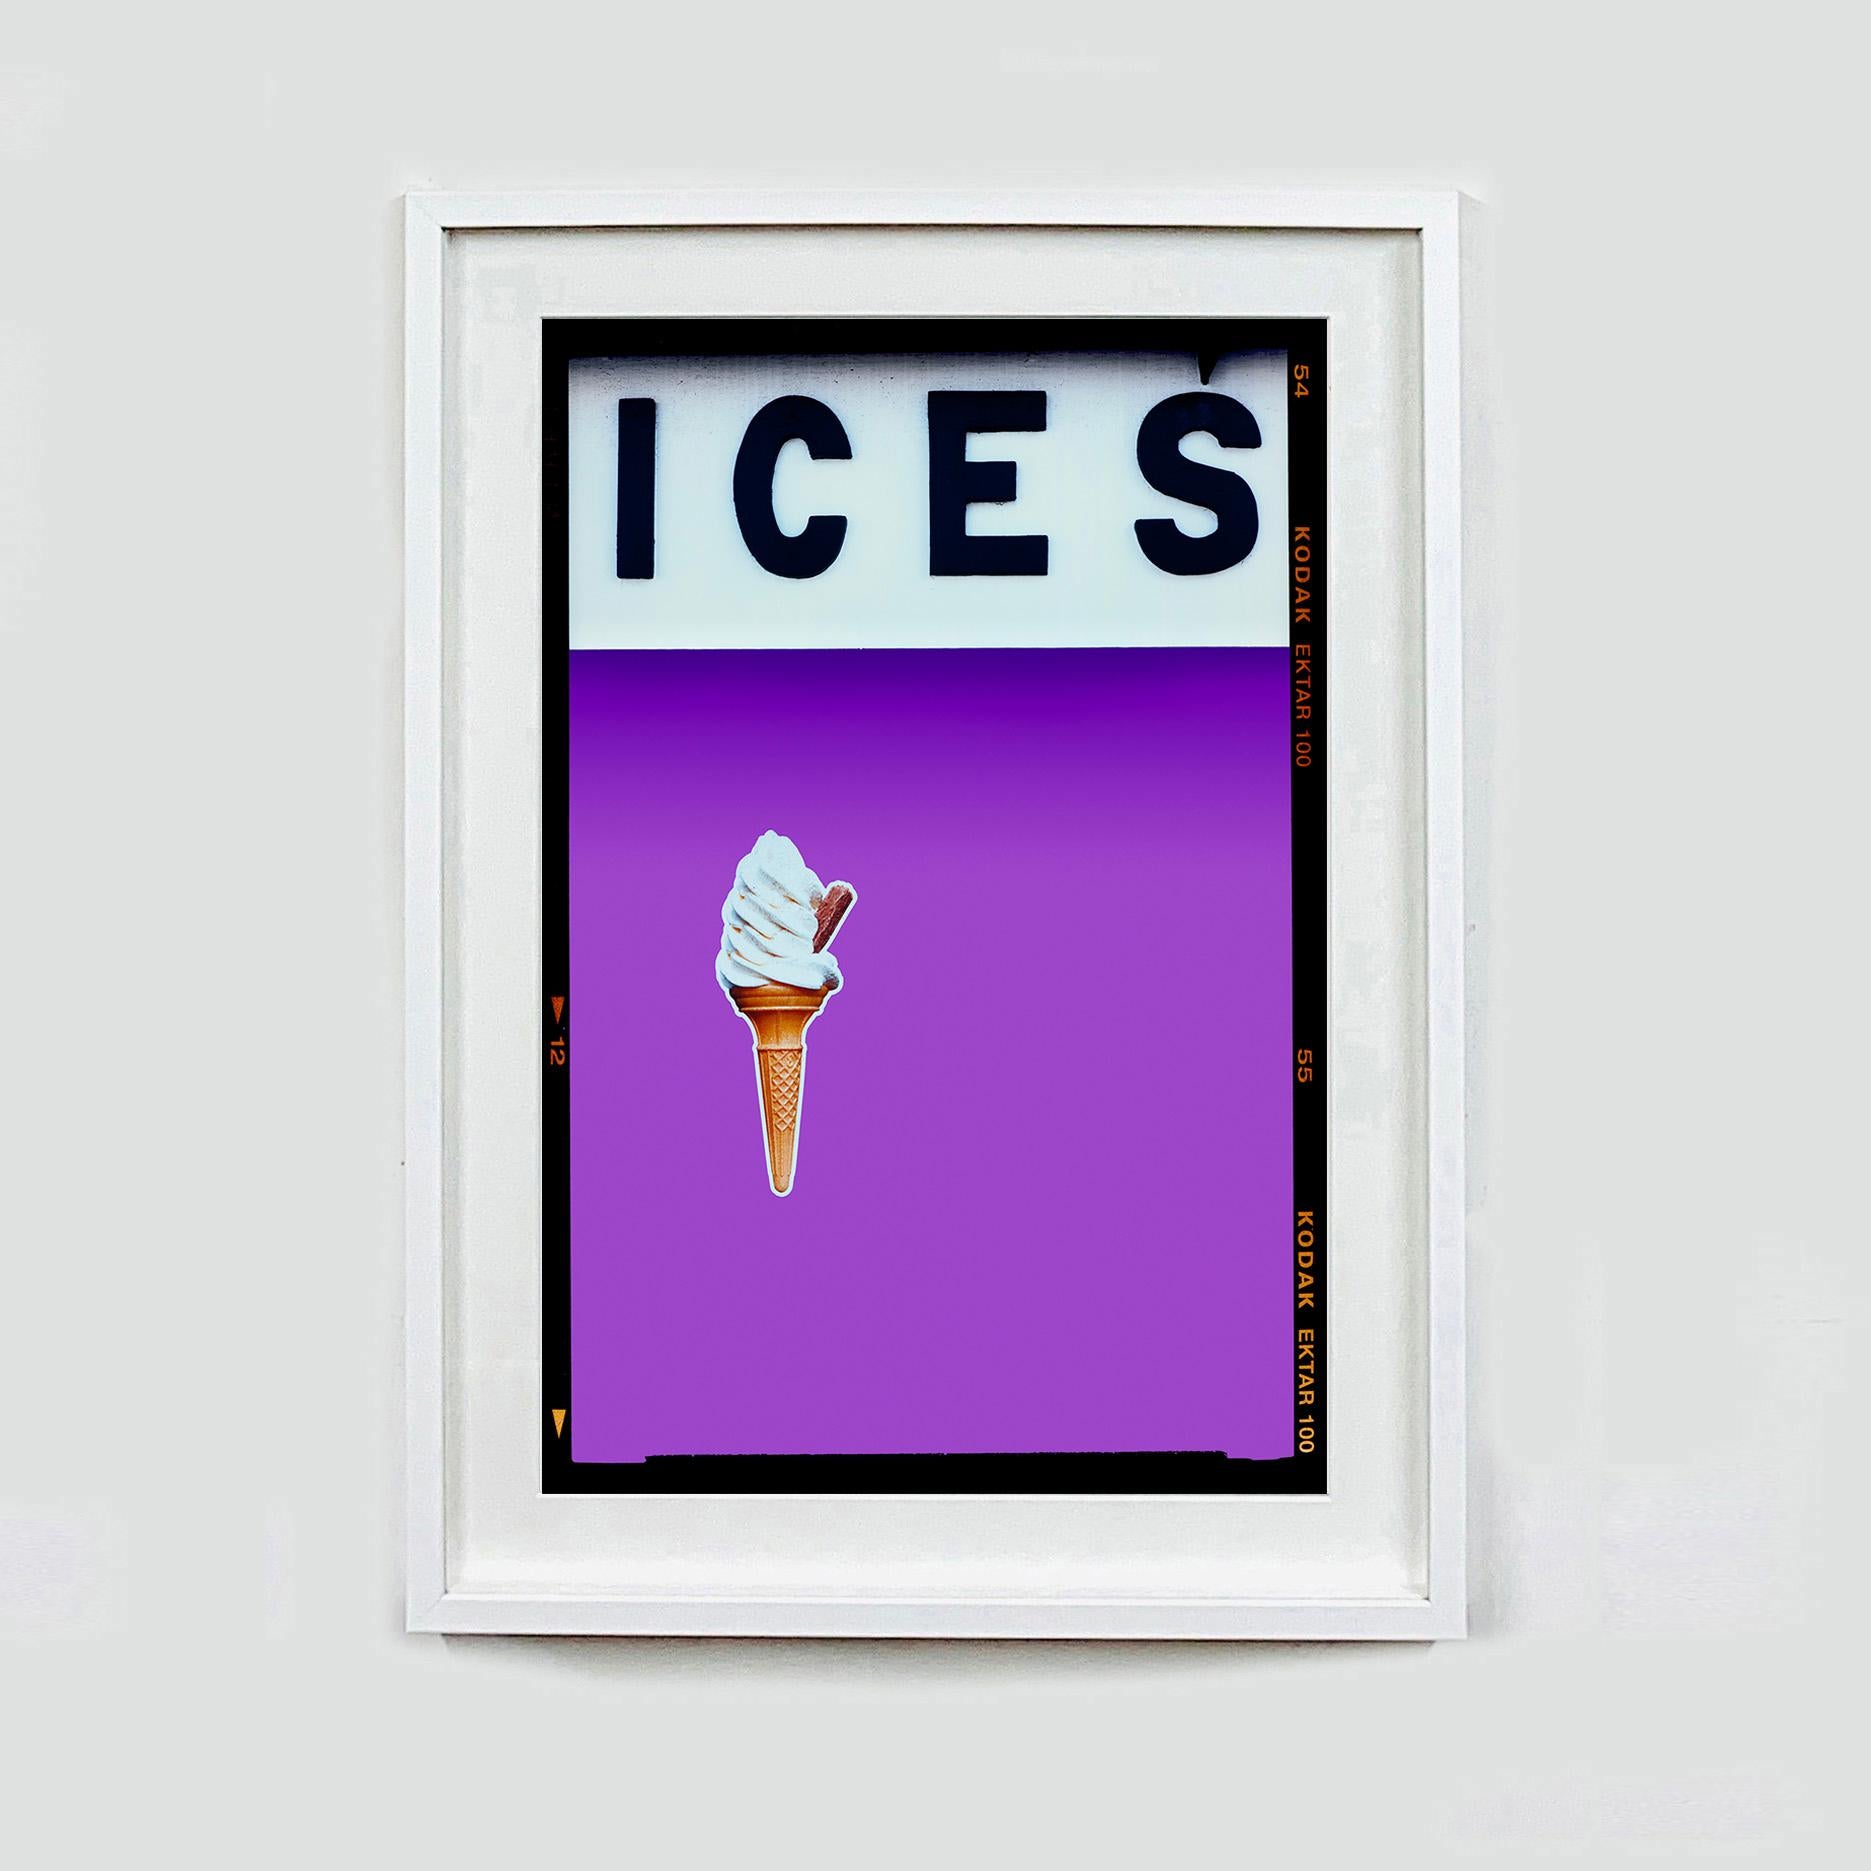 ICES Lilac Purple and Sherbet Yellow, Two Framed Pop Art Color Photographs For Sale 2